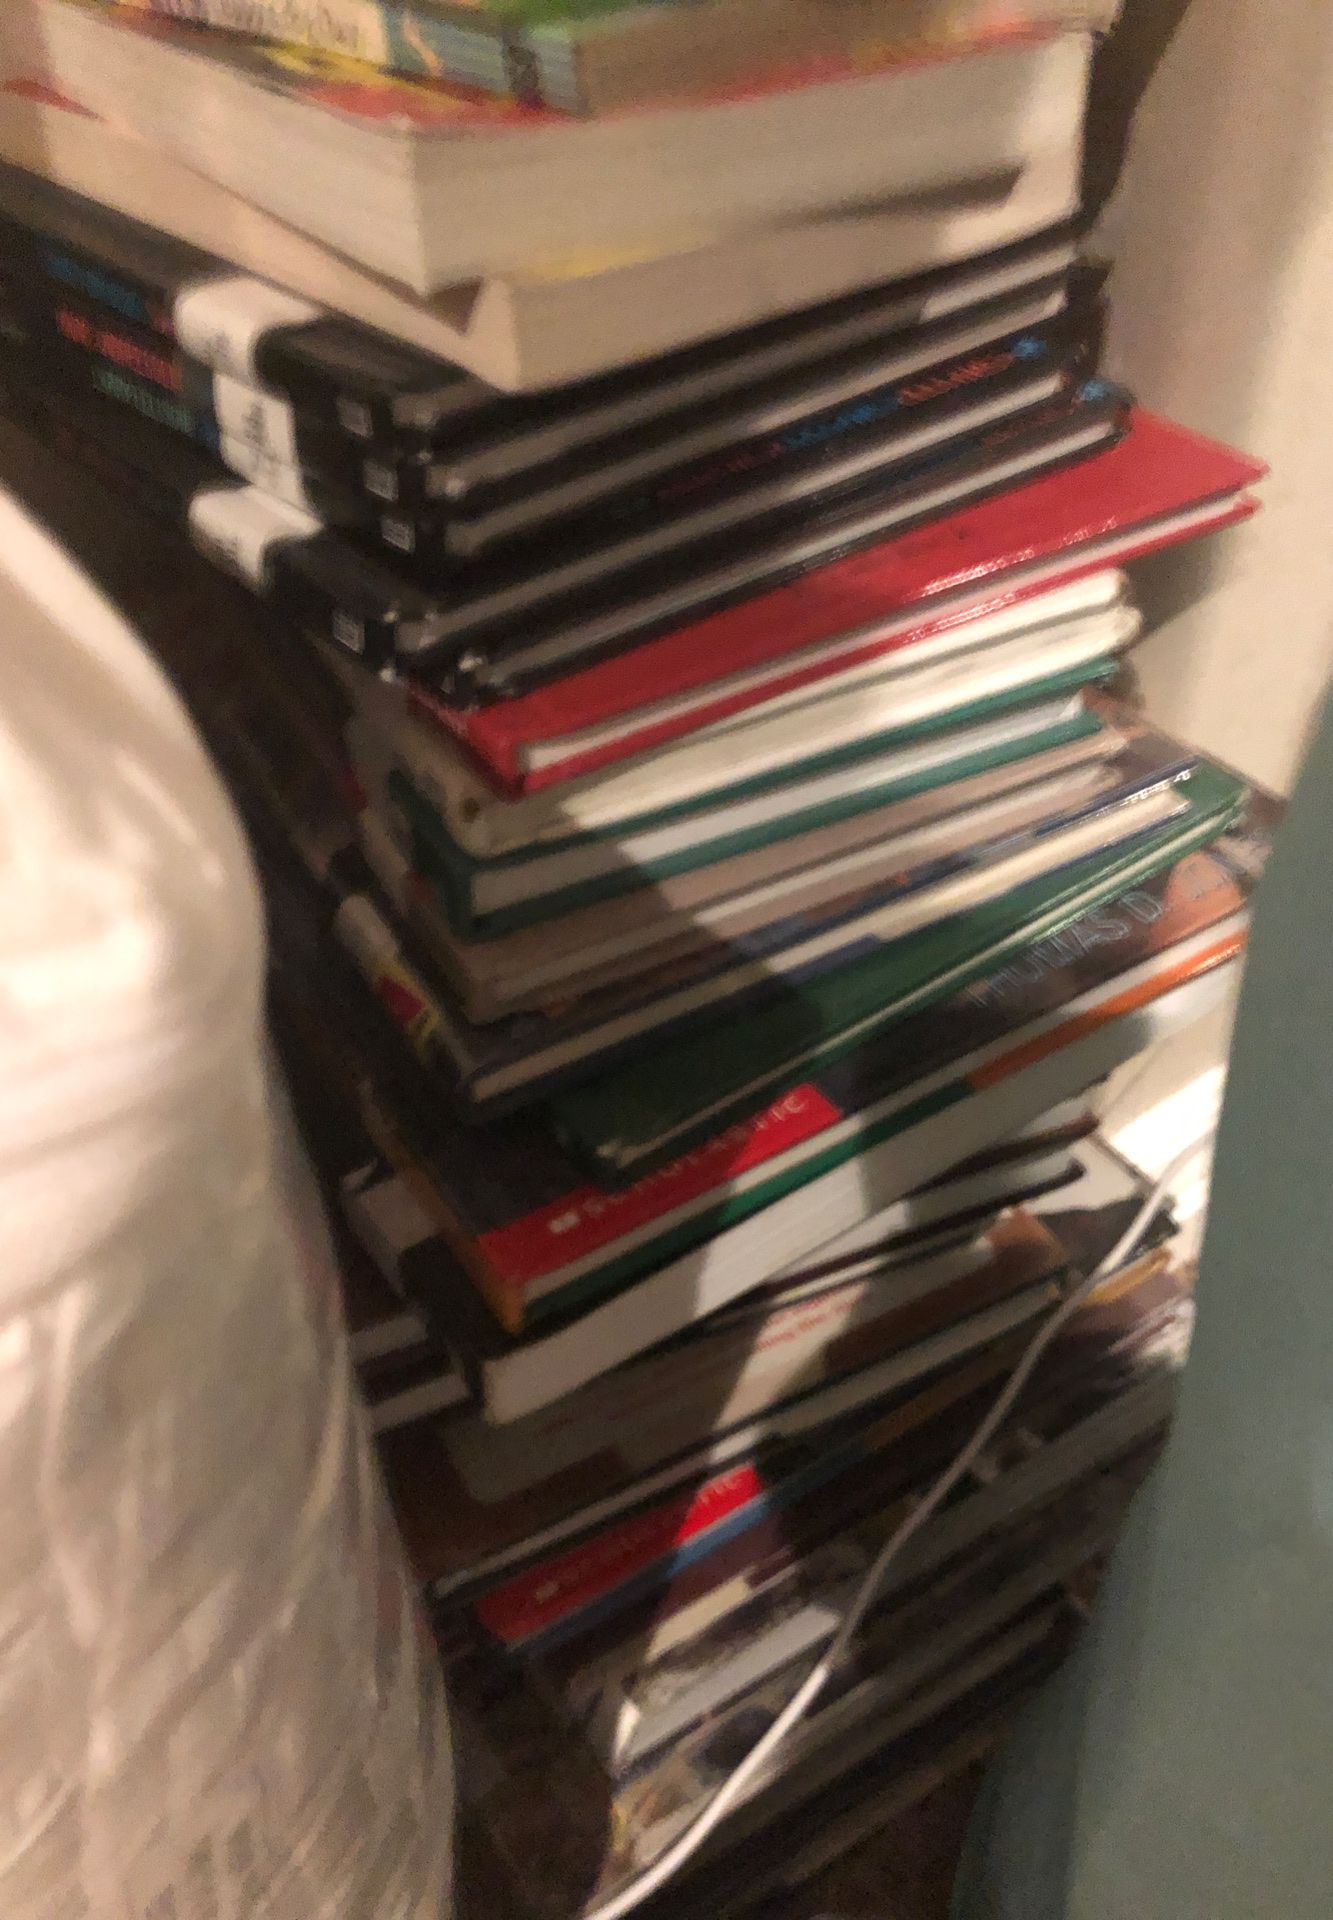 A lot of books